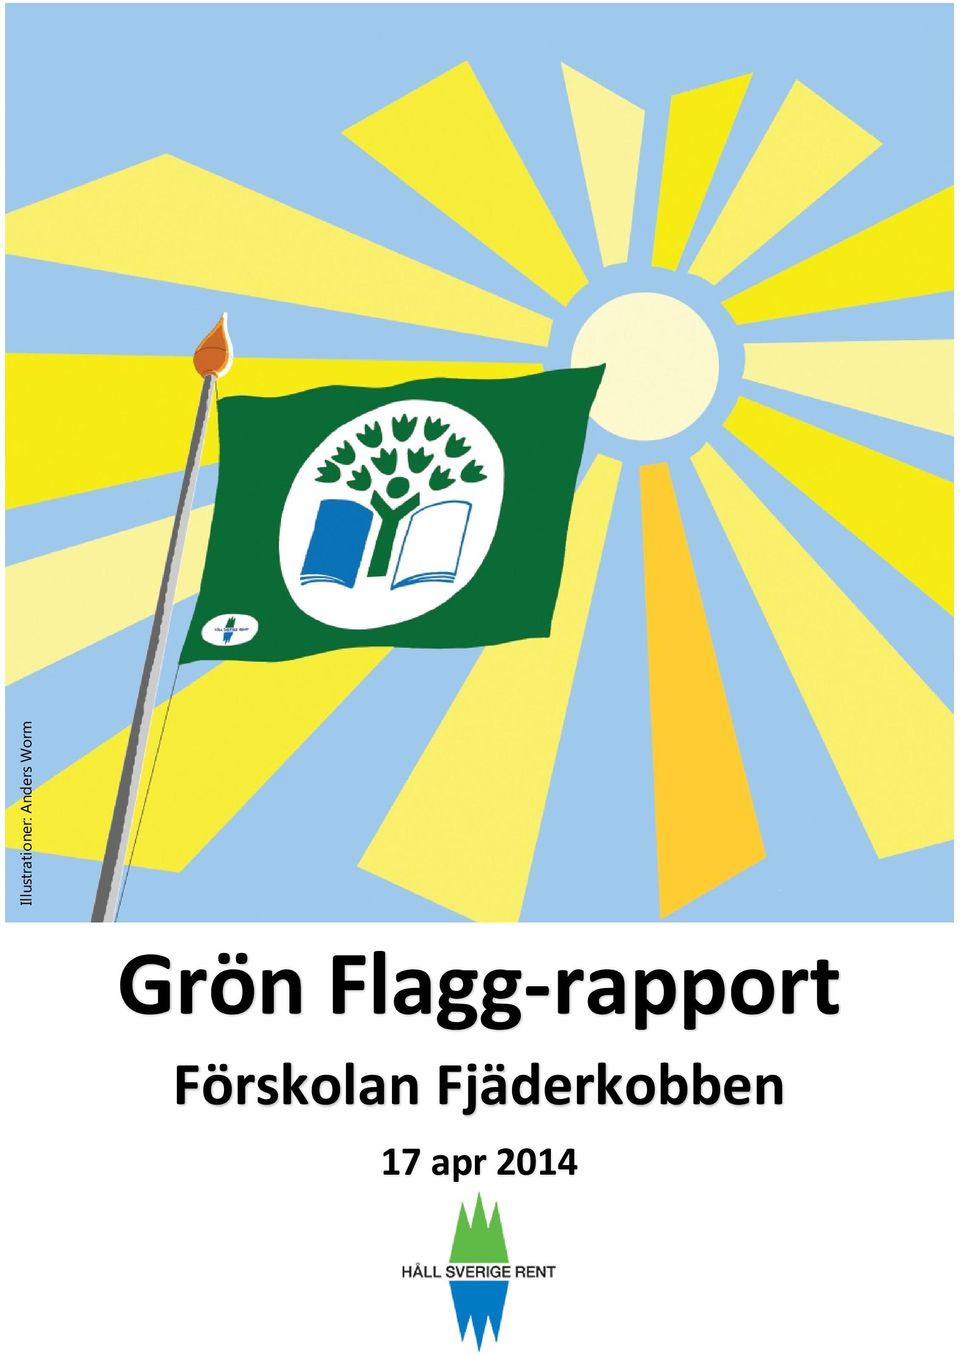 Flagg-rapport